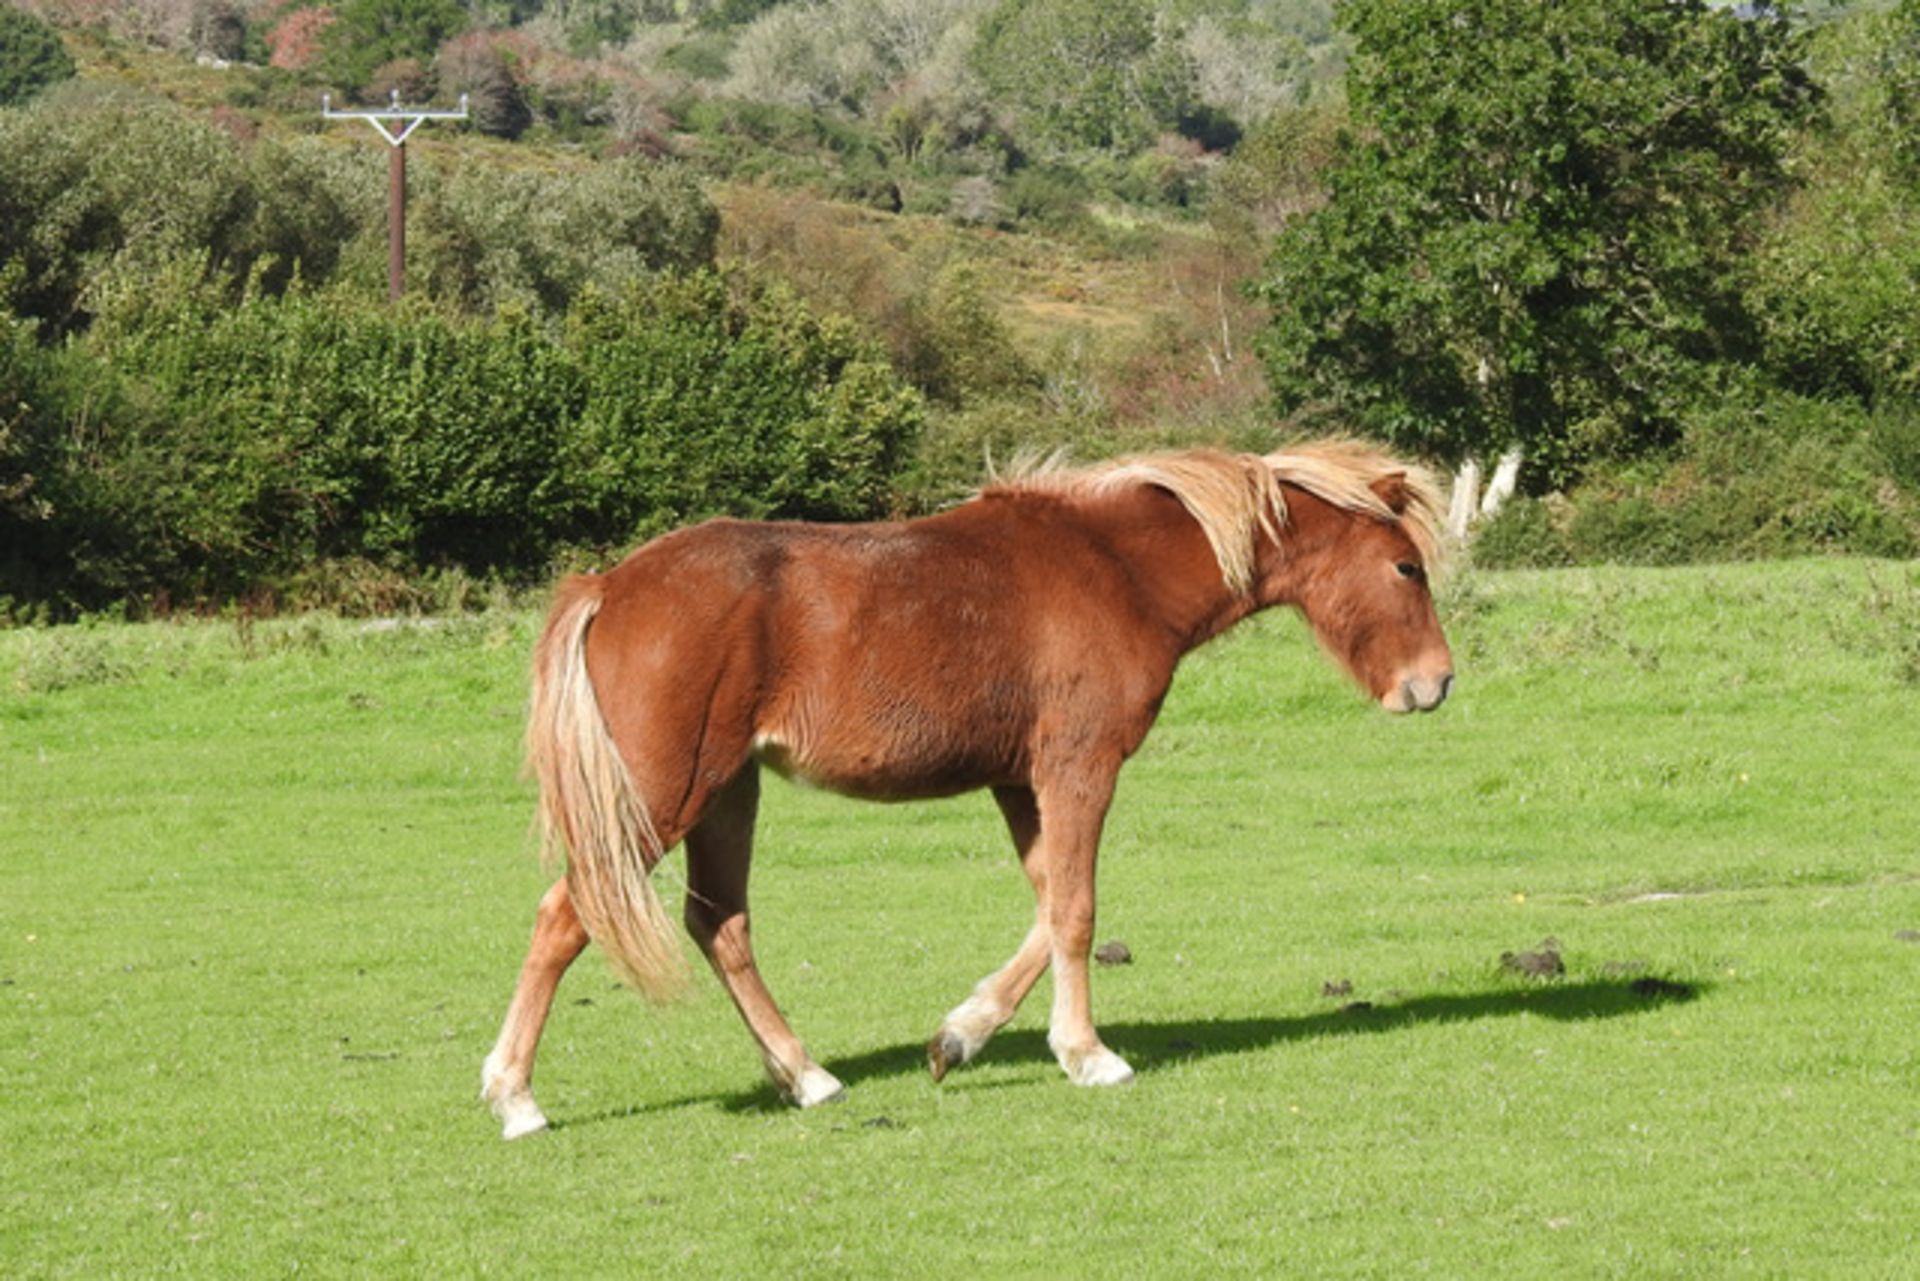 'CATOR HONEY' DARTMOOR HILL PONY CHESTNUT FILLY APPROX 18 MONTHS OLD - Image 4 of 4